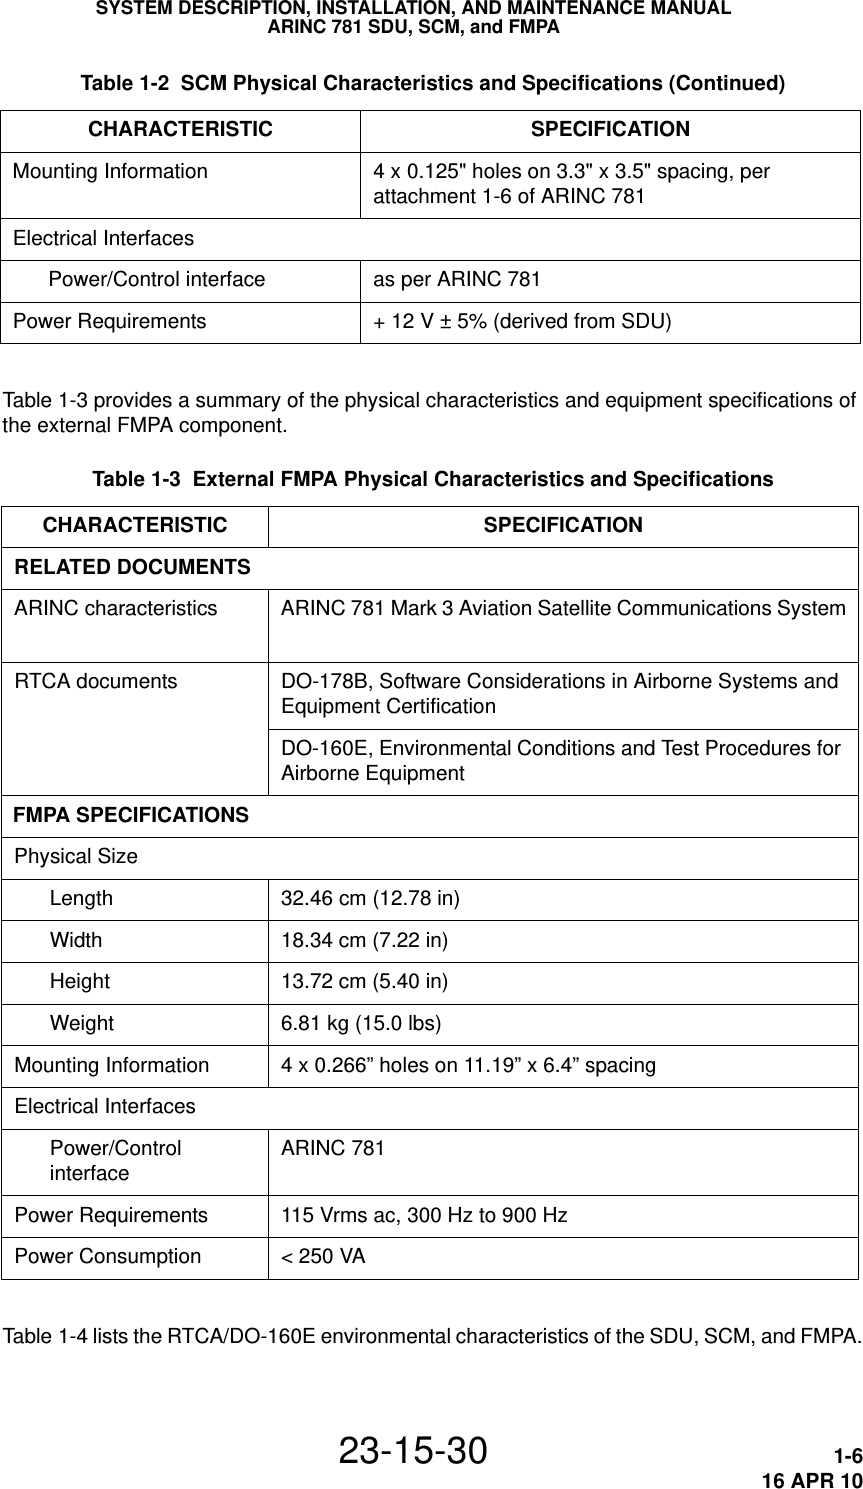 SYSTEM DESCRIPTION, INSTALLATION, AND MAINTENANCE MANUALARINC 781 SDU, SCM, and FMPA23-15-30 1-616 APR 10Table 1-3 provides a summary of the physical characteristics and equipment specifications of the external FMPA component. Table 1-3  External FMPA Physical Characteristics and Specifications CHARACTERISTIC SPECIFICATIONRELATED DOCUMENTSARINC characteristics ARINC 781 Mark 3 Aviation Satellite Communications SystemRTCA documents DO-178B, Software Considerations in Airborne Systems and Equipment CertificationDO-160E, Environmental Conditions and Test Procedures for Airborne EquipmentFMPA SPECIFICATIONSPhysical SizeLength 32.46 cm (12.78 in)Width 18.34 cm (7.22 in)Height 13.72 cm (5.40 in)Weight 6.81 kg (15.0 lbs)Mounting Information 4 x 0.266” holes on 11.19” x 6.4” spacingElectrical InterfacesPower/Control interfaceARINC 781Power Requirements 115 Vrms ac, 300 Hz to 900 HzPower Consumption &lt; 250 VATable 1-4 lists the RTCA/DO-160E environmental characteristics of the SDU, SCM, and FMPA.Mounting Information 4 x 0.125&quot; holes on 3.3&quot; x 3.5&quot; spacing, per attachment 1-6 of ARINC 781Electrical InterfacesPower/Control interface as per ARINC 781Power Requirements + 12 V ± 5% (derived from SDU) Table 1-2  SCM Physical Characteristics and Specifications (Continued)CHARACTERISTIC SPECIFICATION